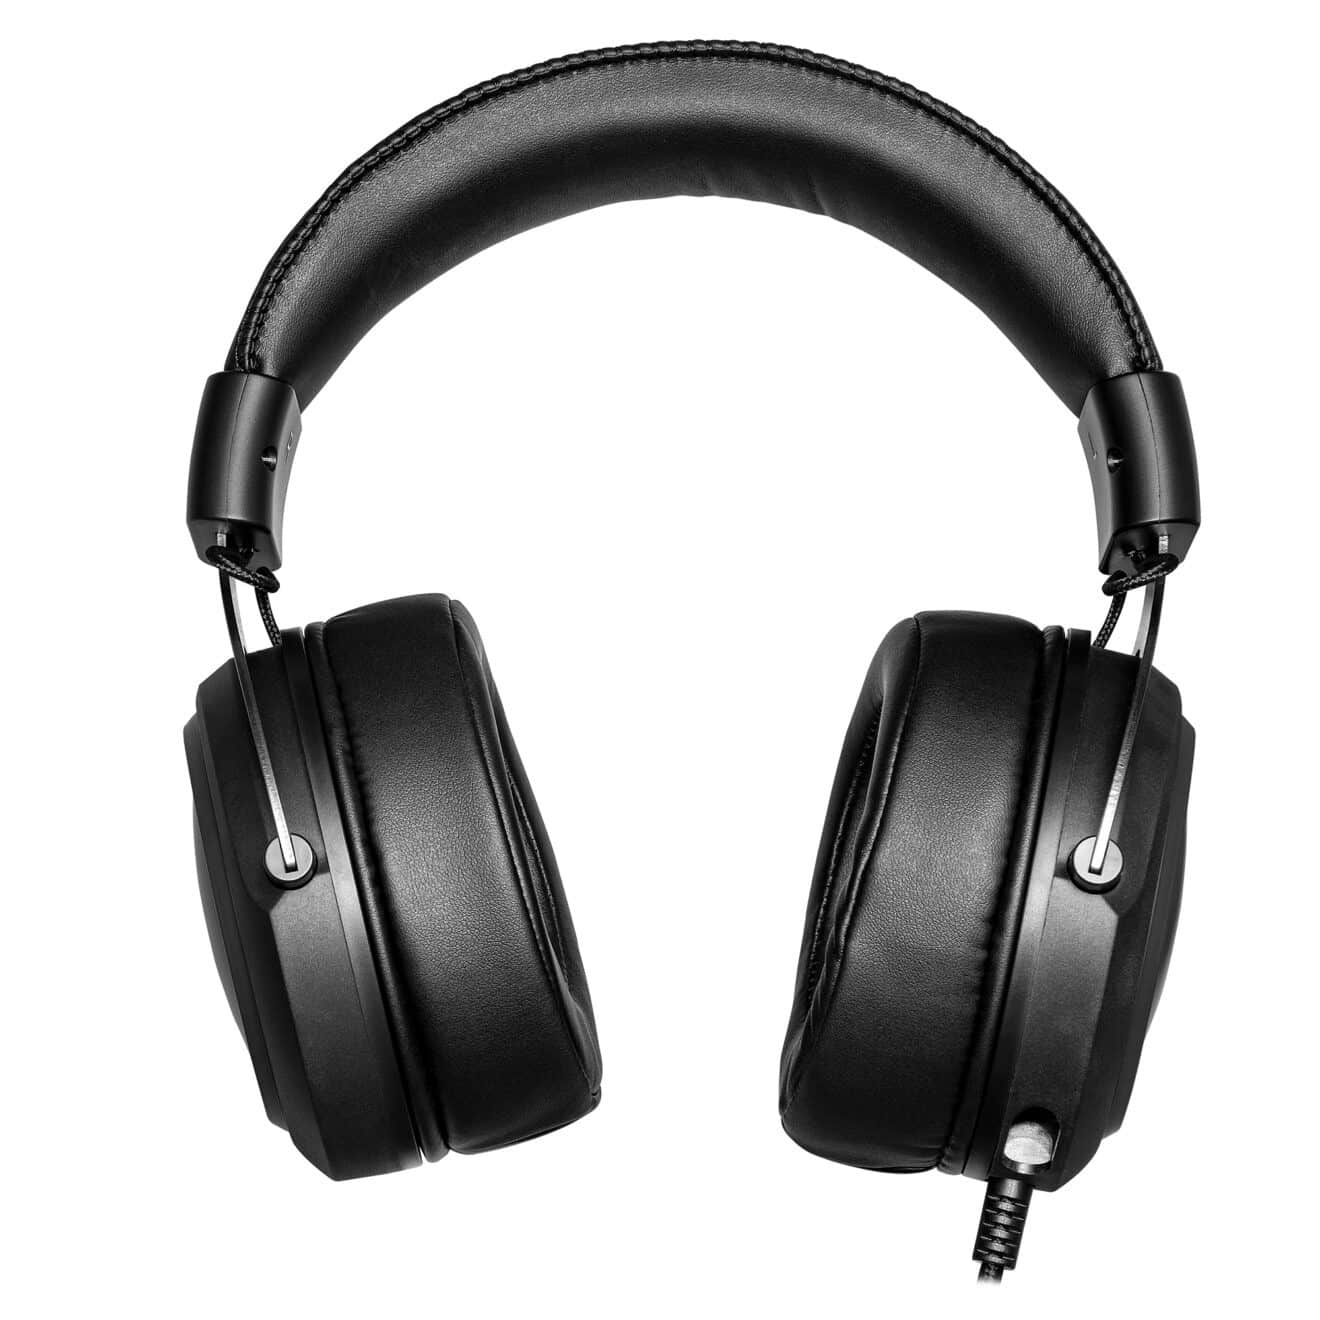 Cooler Master CH331: Headset with 50 mm drivers and virtual 7.1